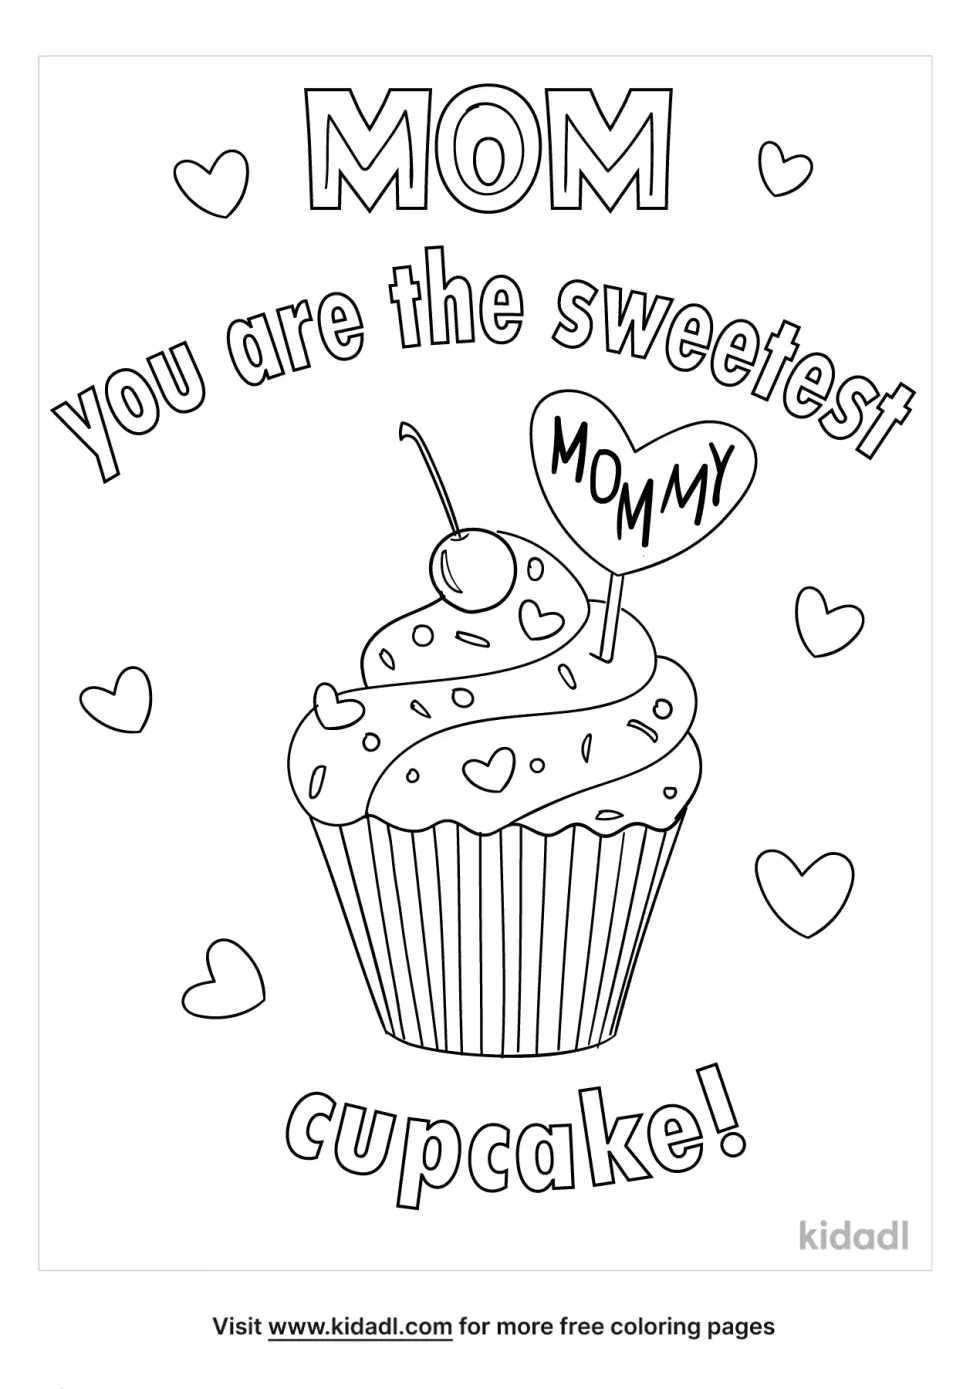 You Are The Sweetest Mom Cupcake